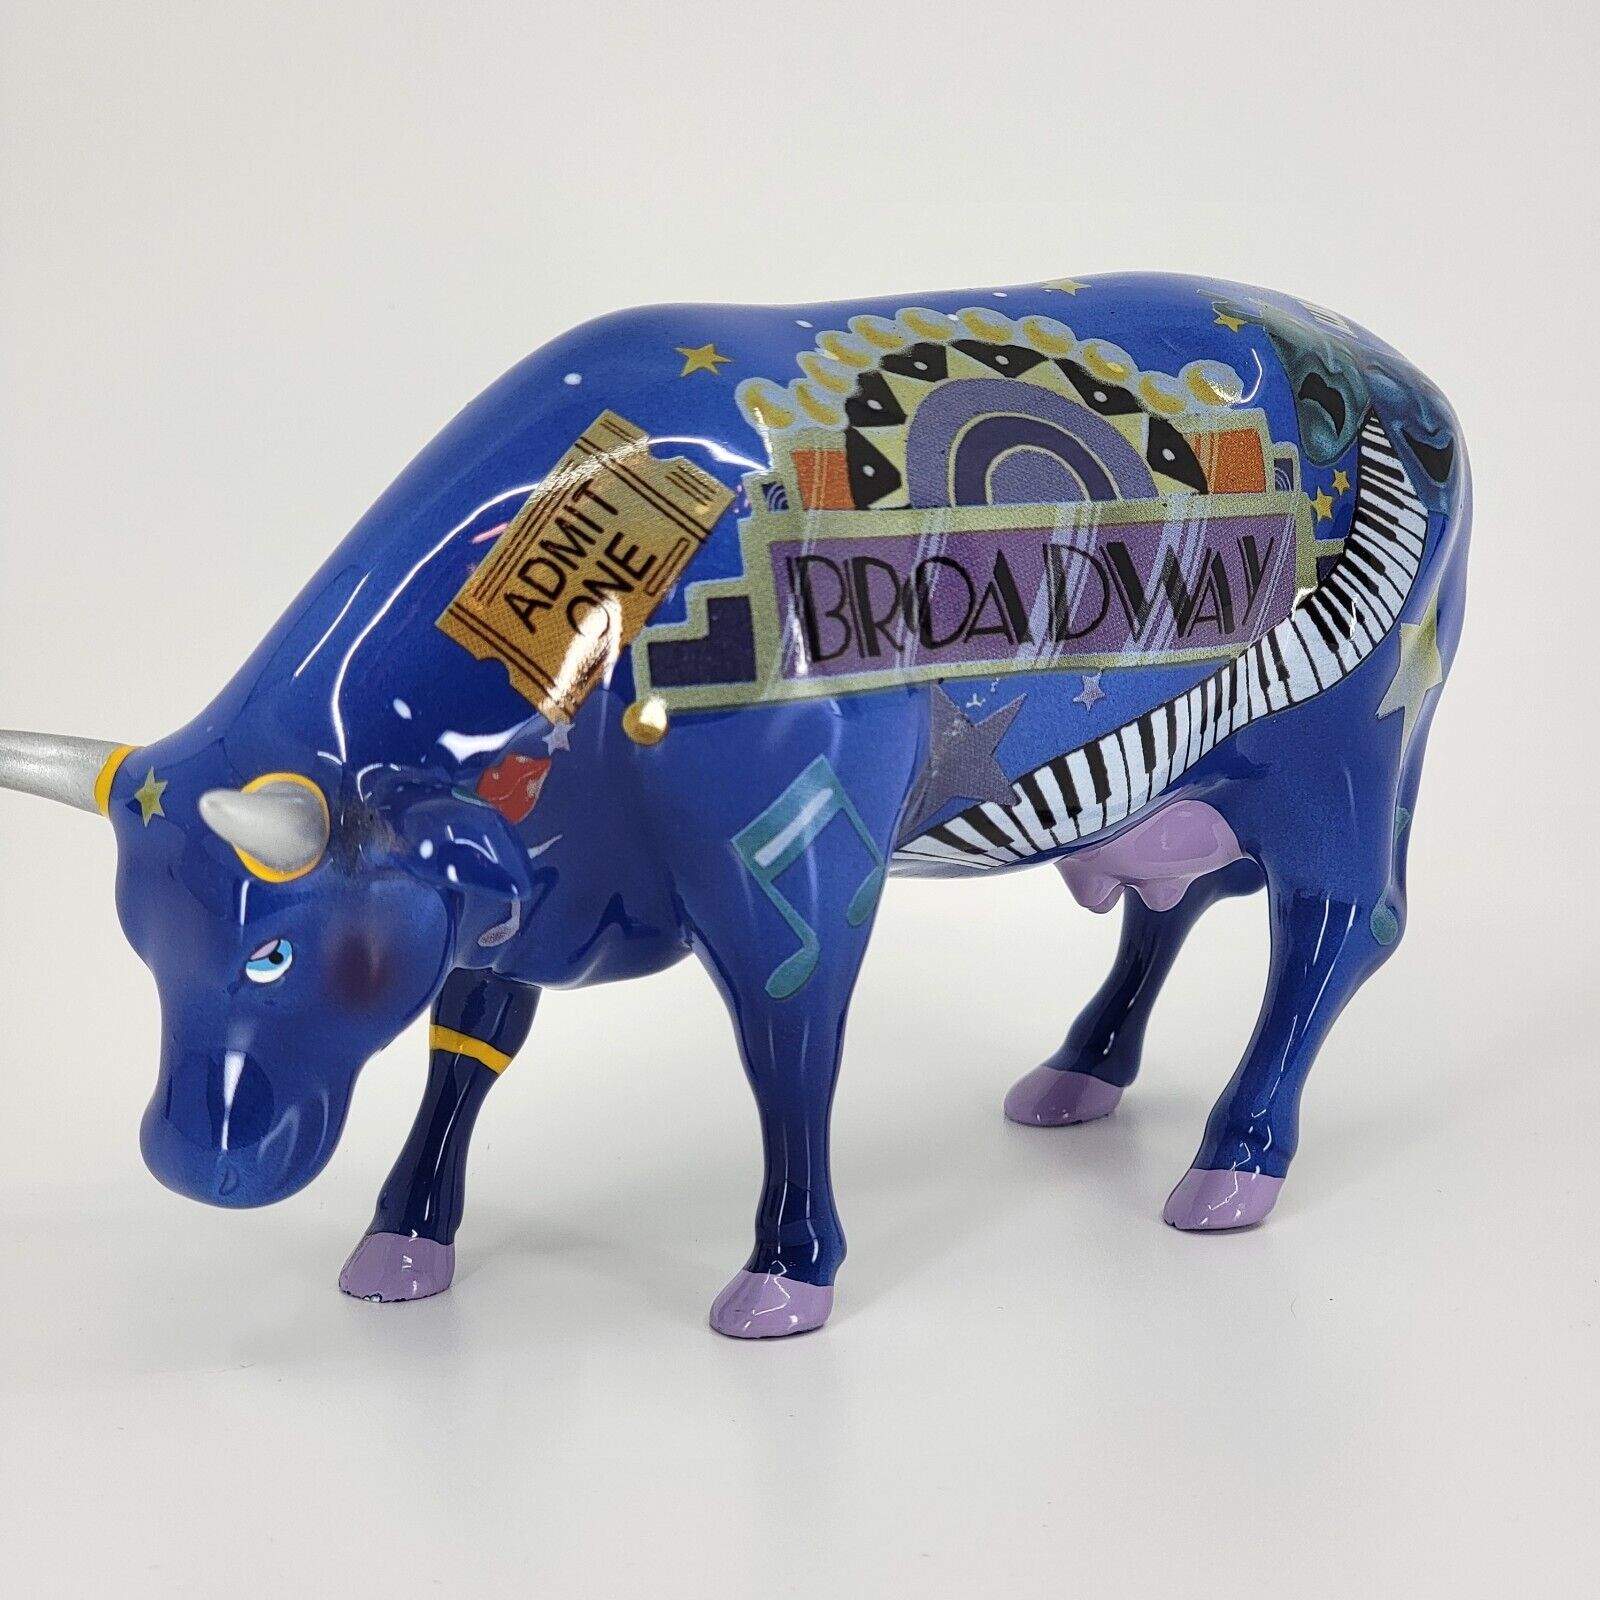 Cow Parade Broadway Baby #9159 Figurine & Tag 2000 Theater Musical New York City